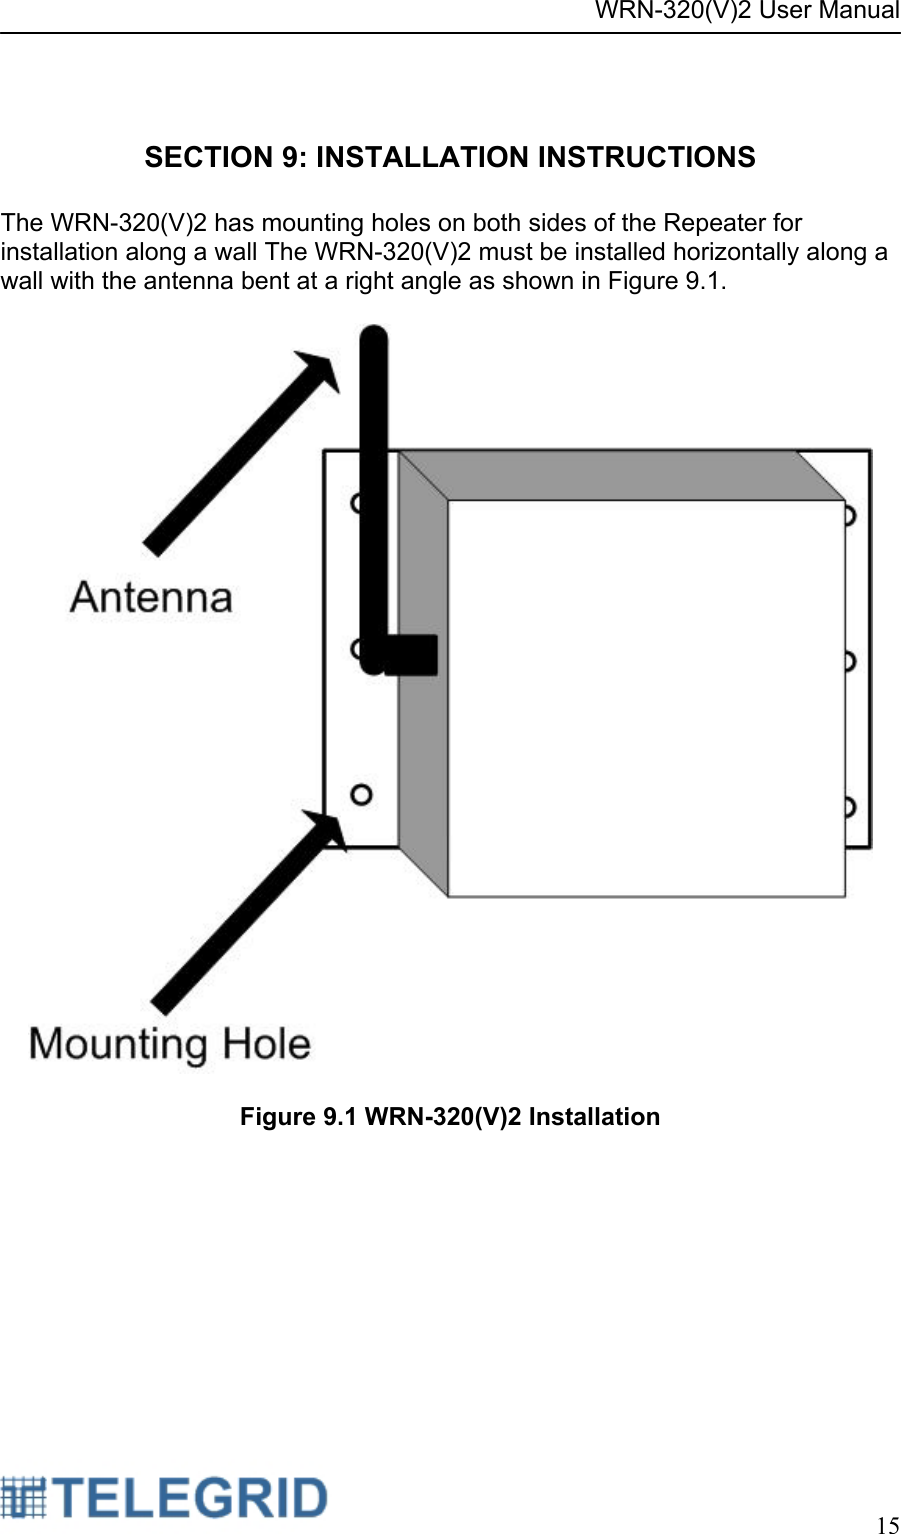 WRN-320(V)2 User Manual     15   SECTION 9: INSTALLATION INSTRUCTIONS  The WRN-320(V)2 has mounting holes on both sides of the Repeater for installation along a wall The WRN-320(V)2 must be installed horizontally along a wall with the antenna bent at a right angle as shown in Figure 9.1.      Figure 9.1 WRN-320(V)2 Installation 